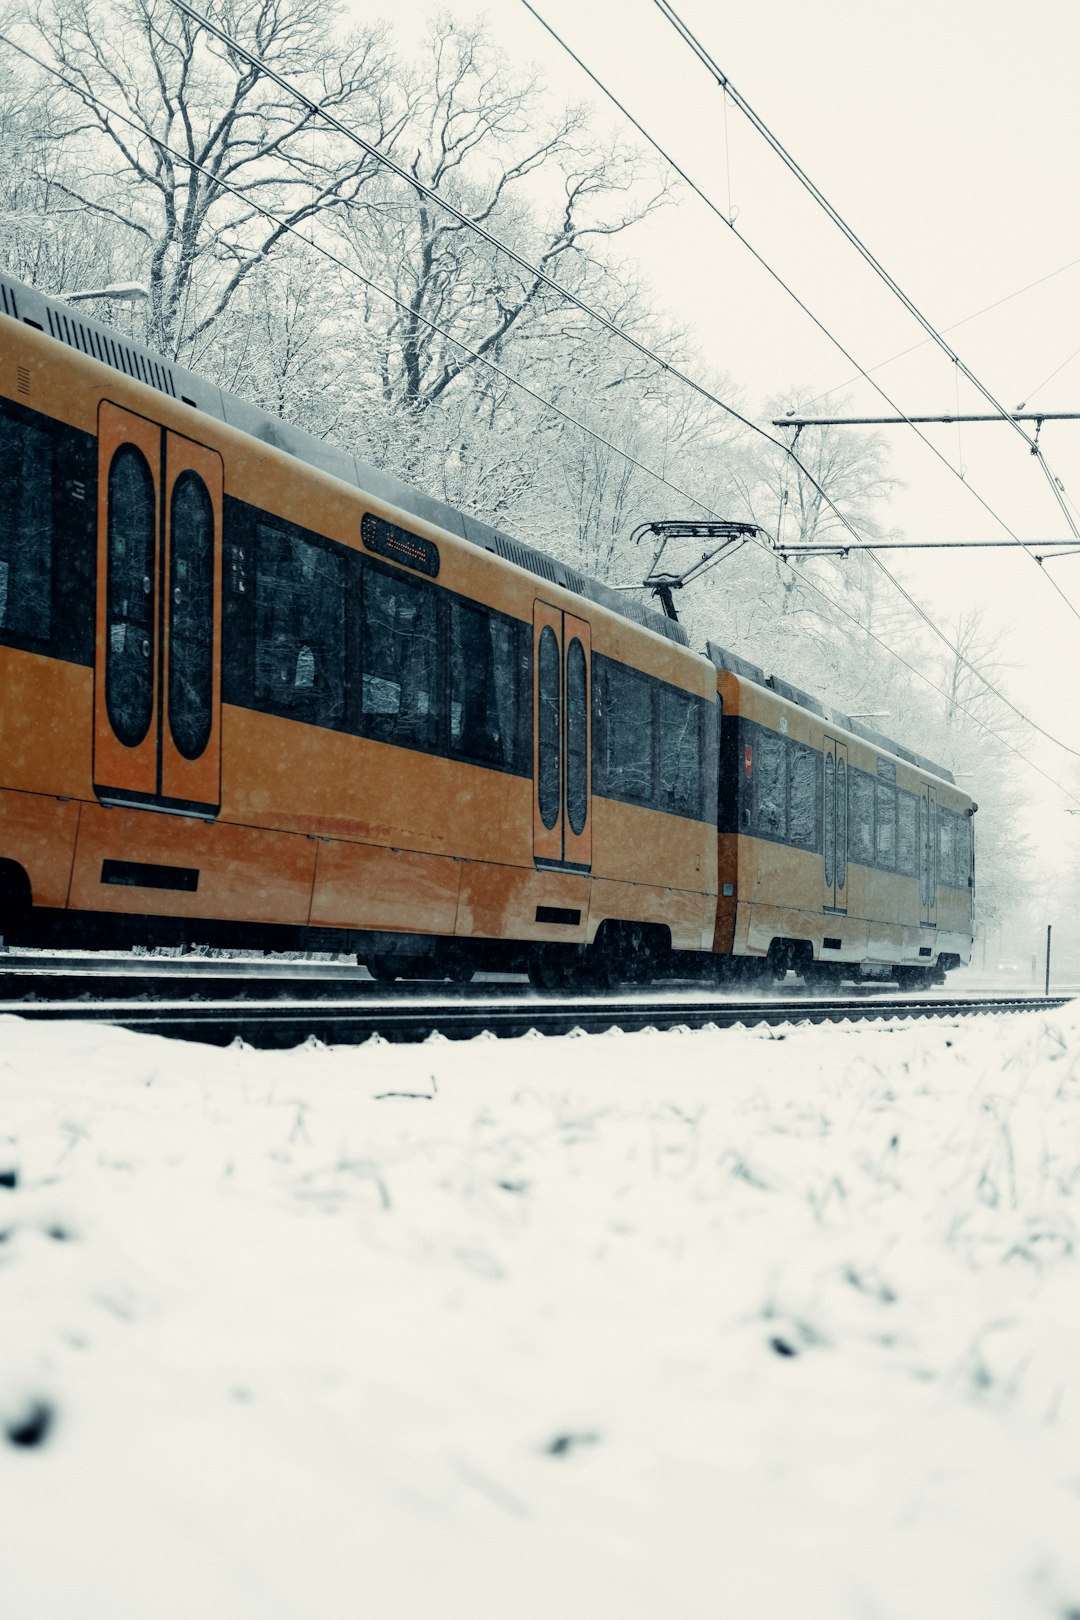 yellow and black train on snow covered ground